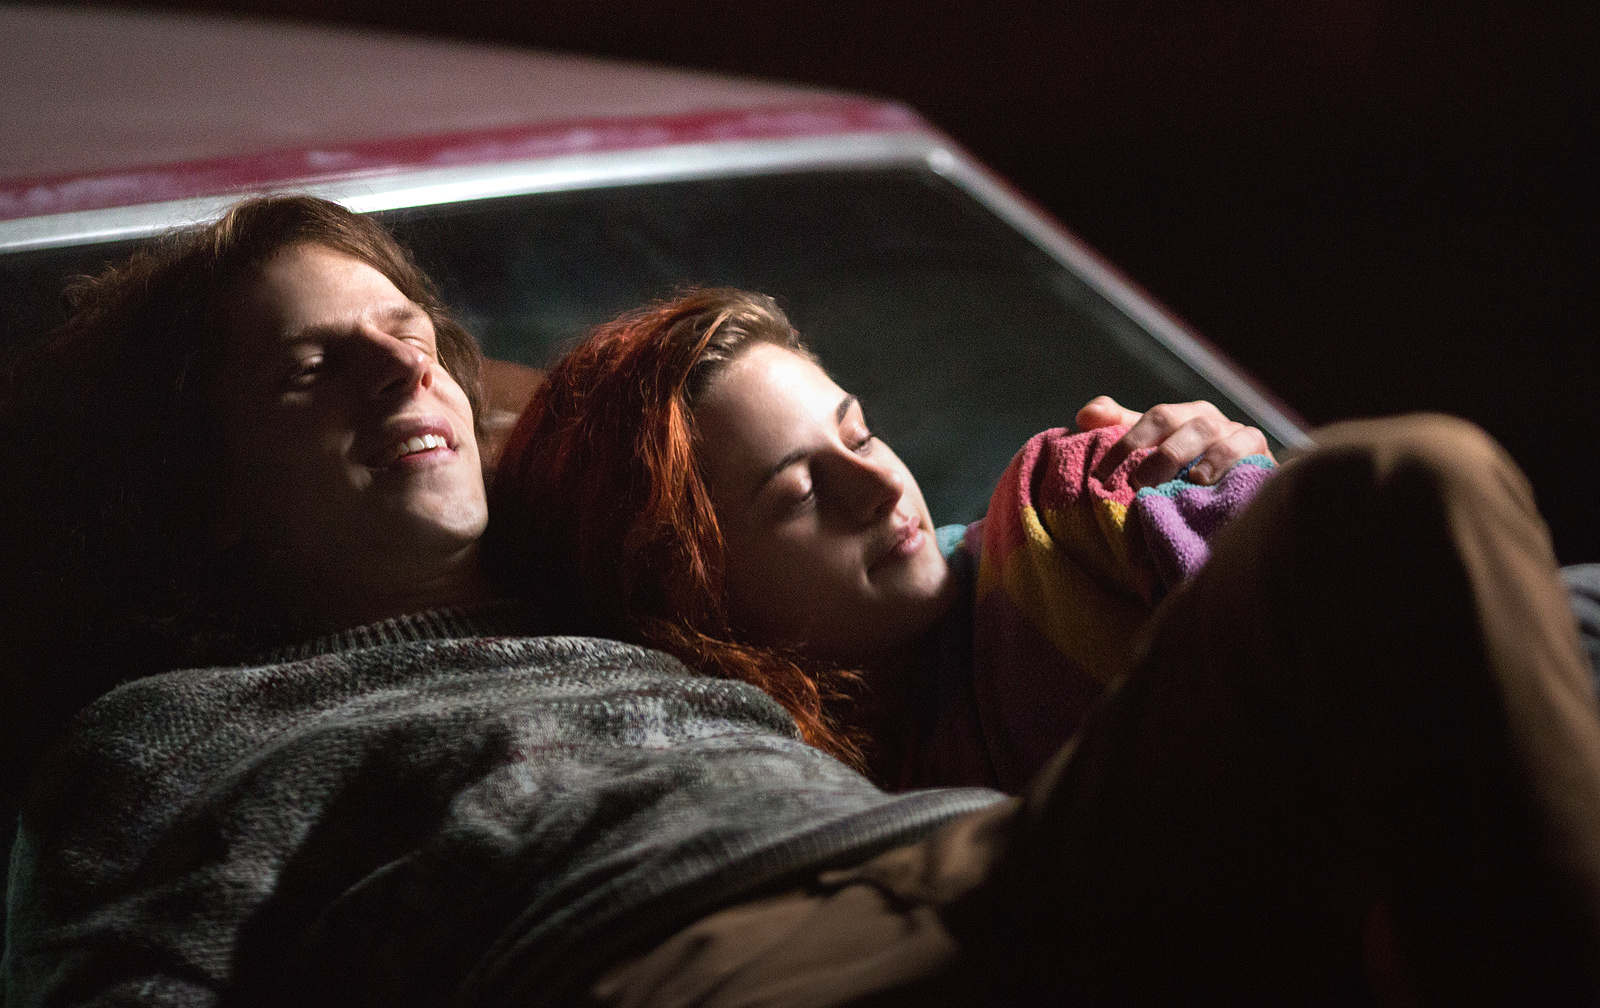 American Ultra Review: Actually A Really Great Technothriller